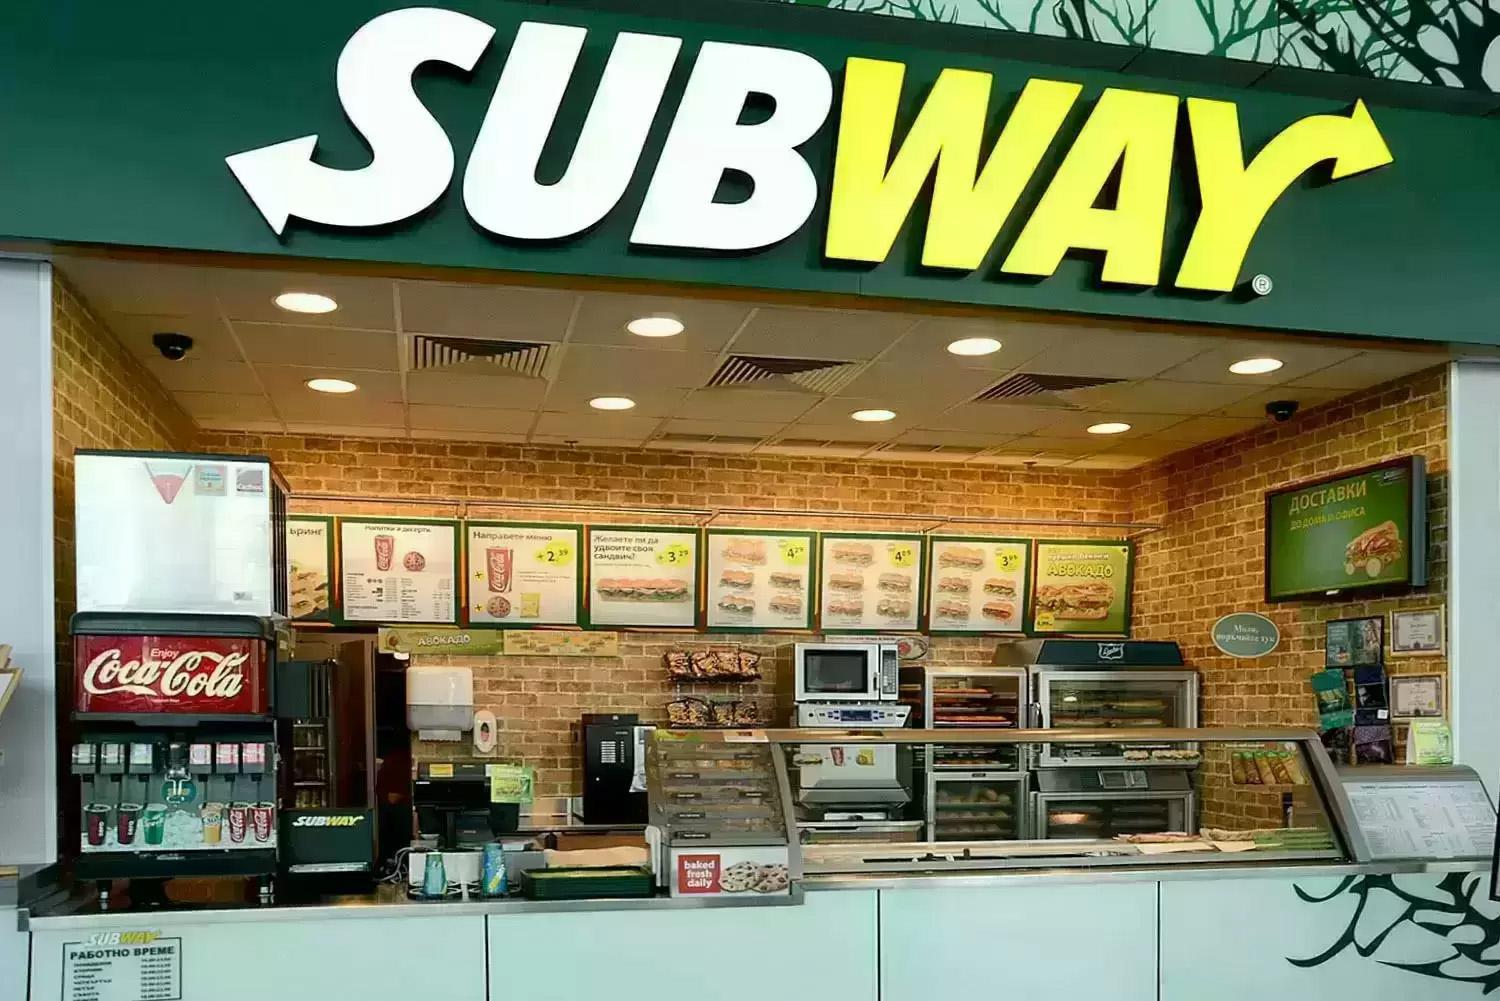 Subway Footlong Sandwich Sub Buy Two Get One Free